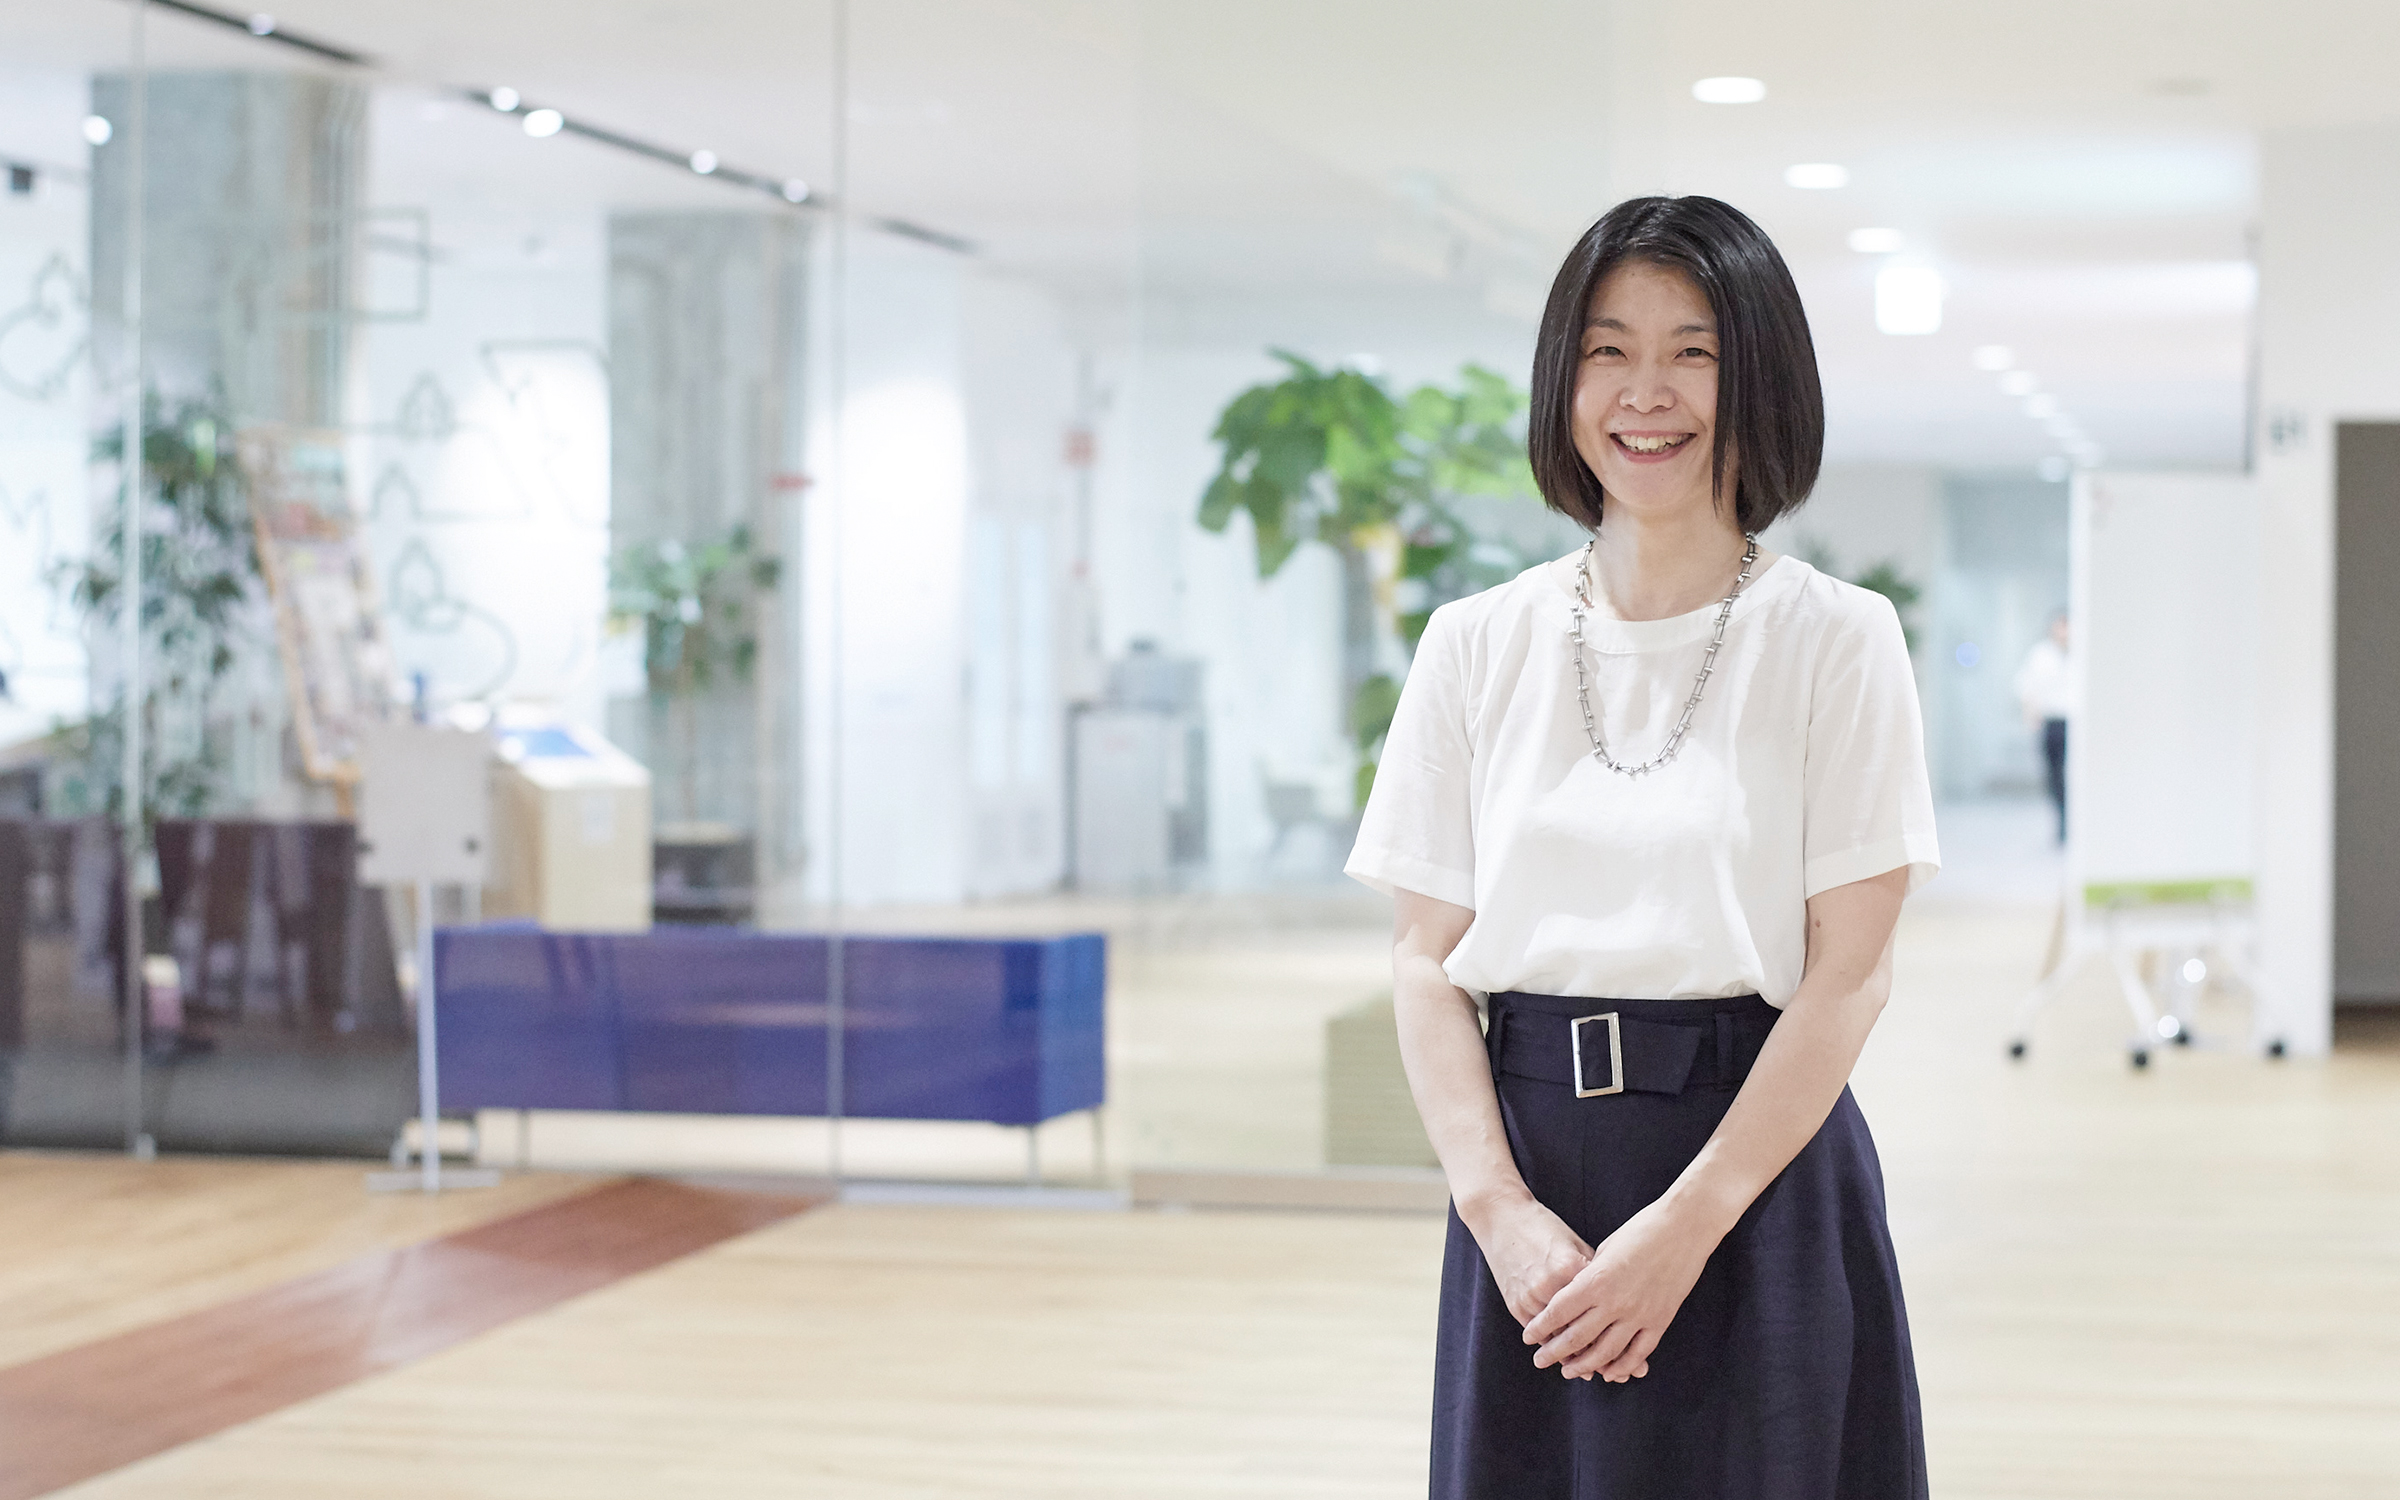 Photo : This glass-walled office provides Yoko Nakao with an open and spacious work atmosphere.